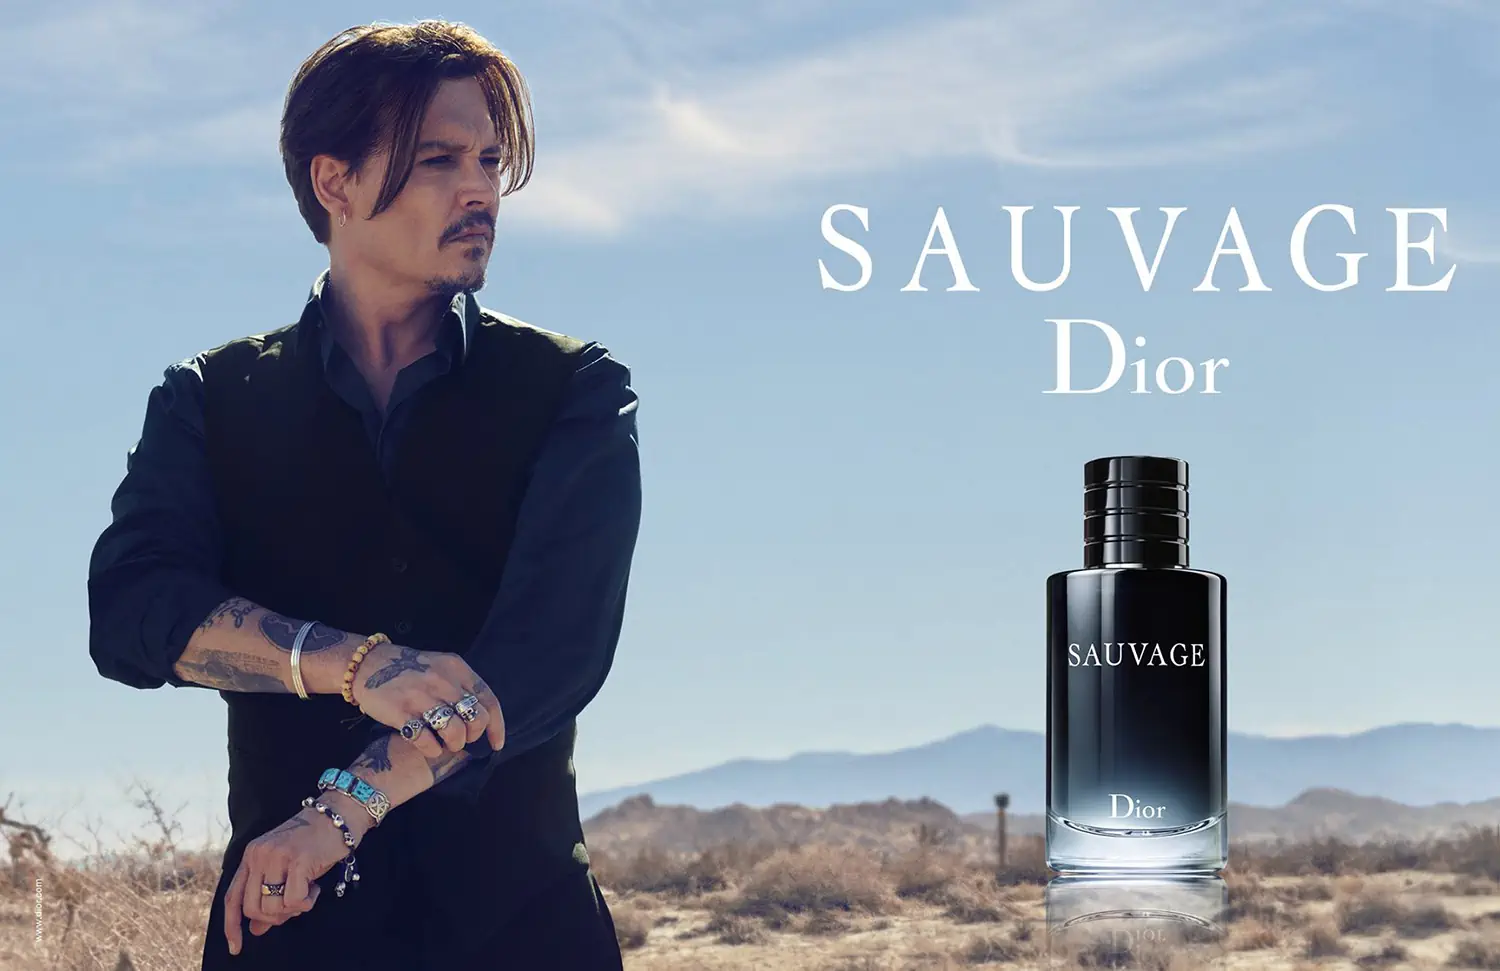 Dior and Johnny Depp, an unyielding partnership worth millions